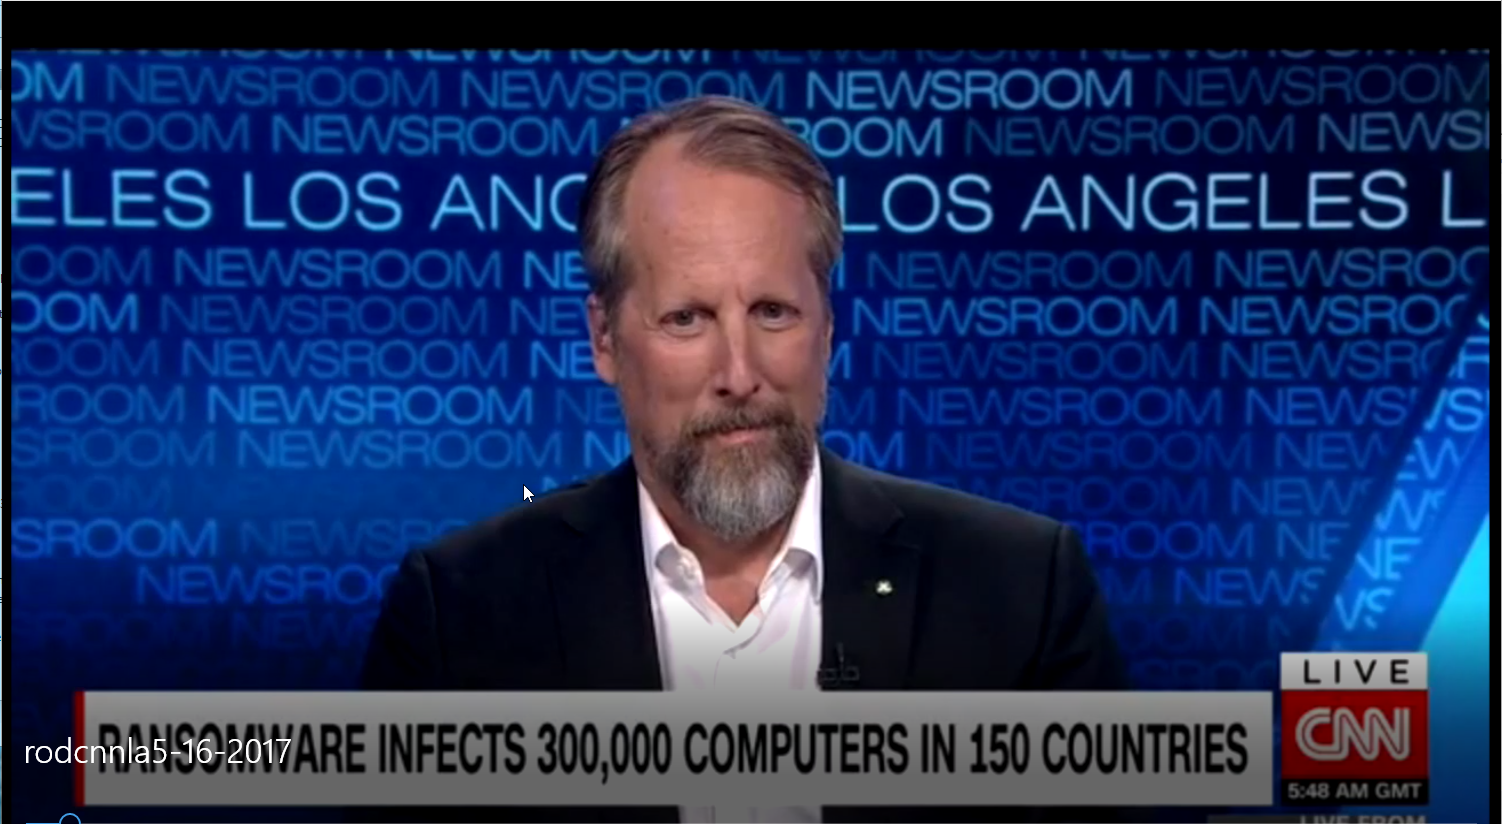 Rod Beckstrom on CNN discussing Cybersecurity